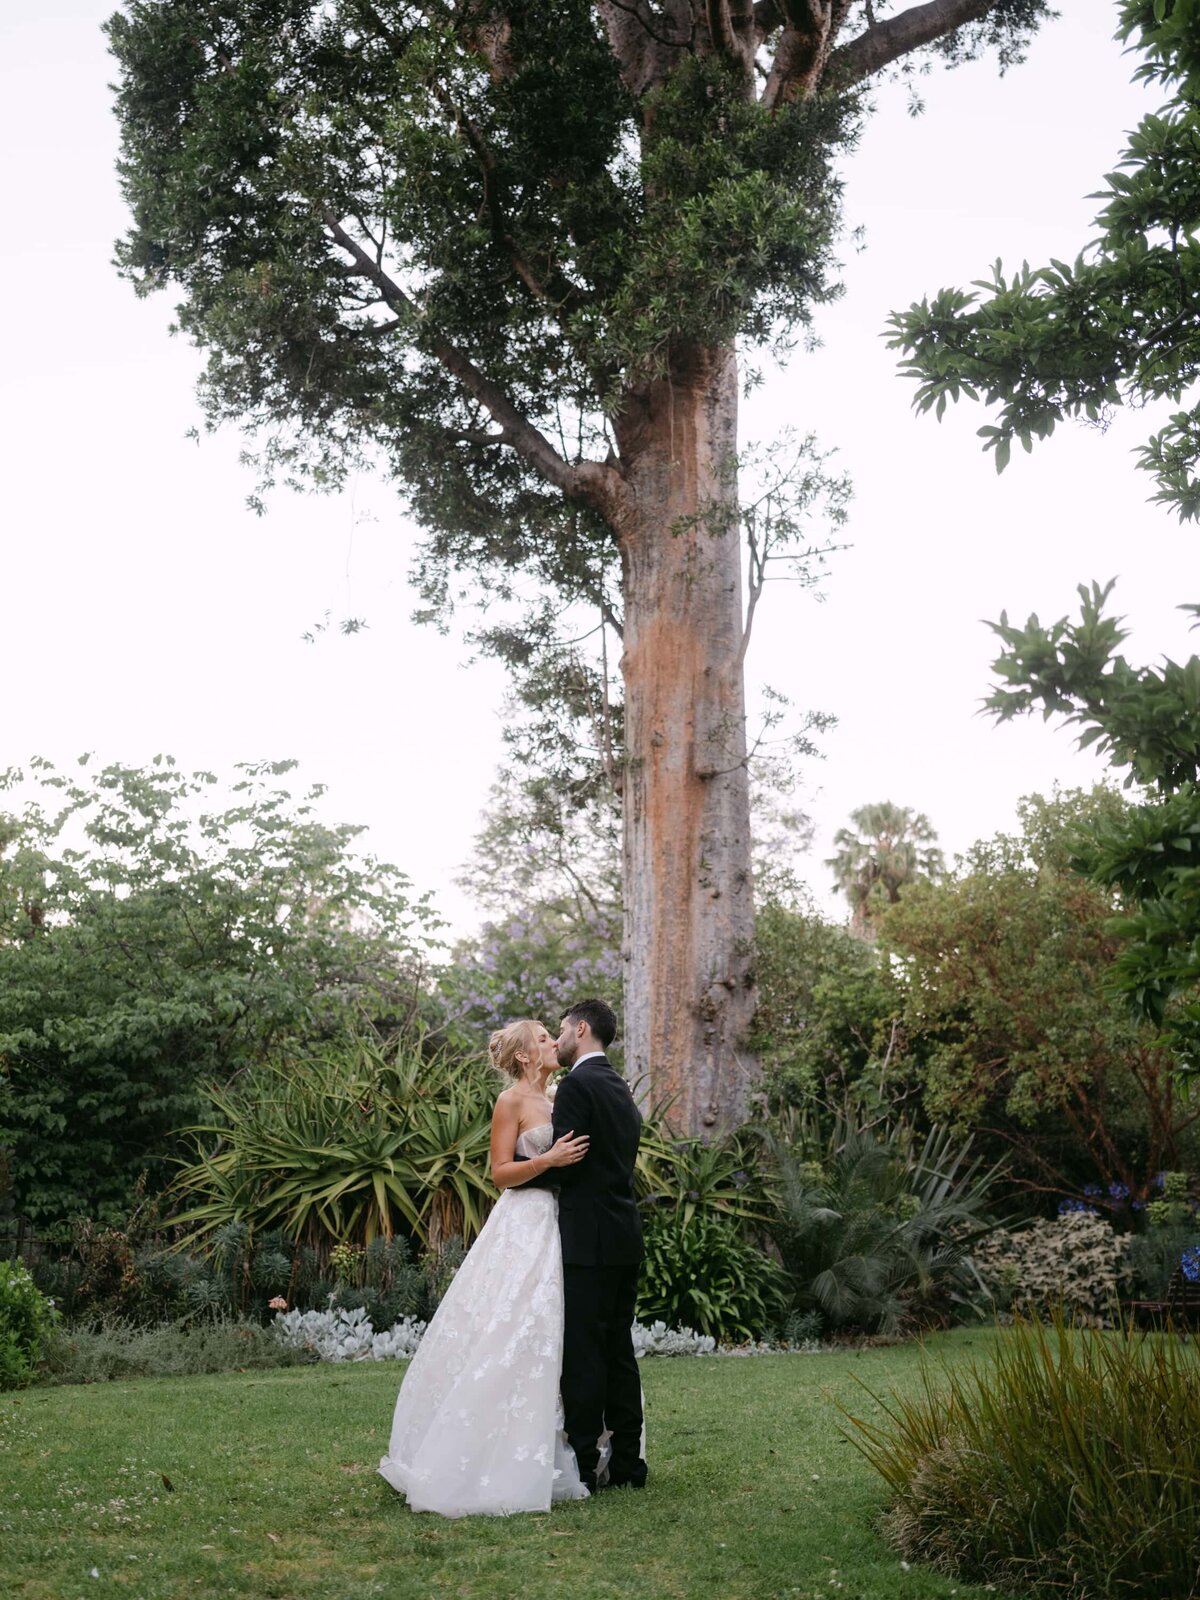 The Gardens House Wedding - Melbourne - Serenity Photography 89